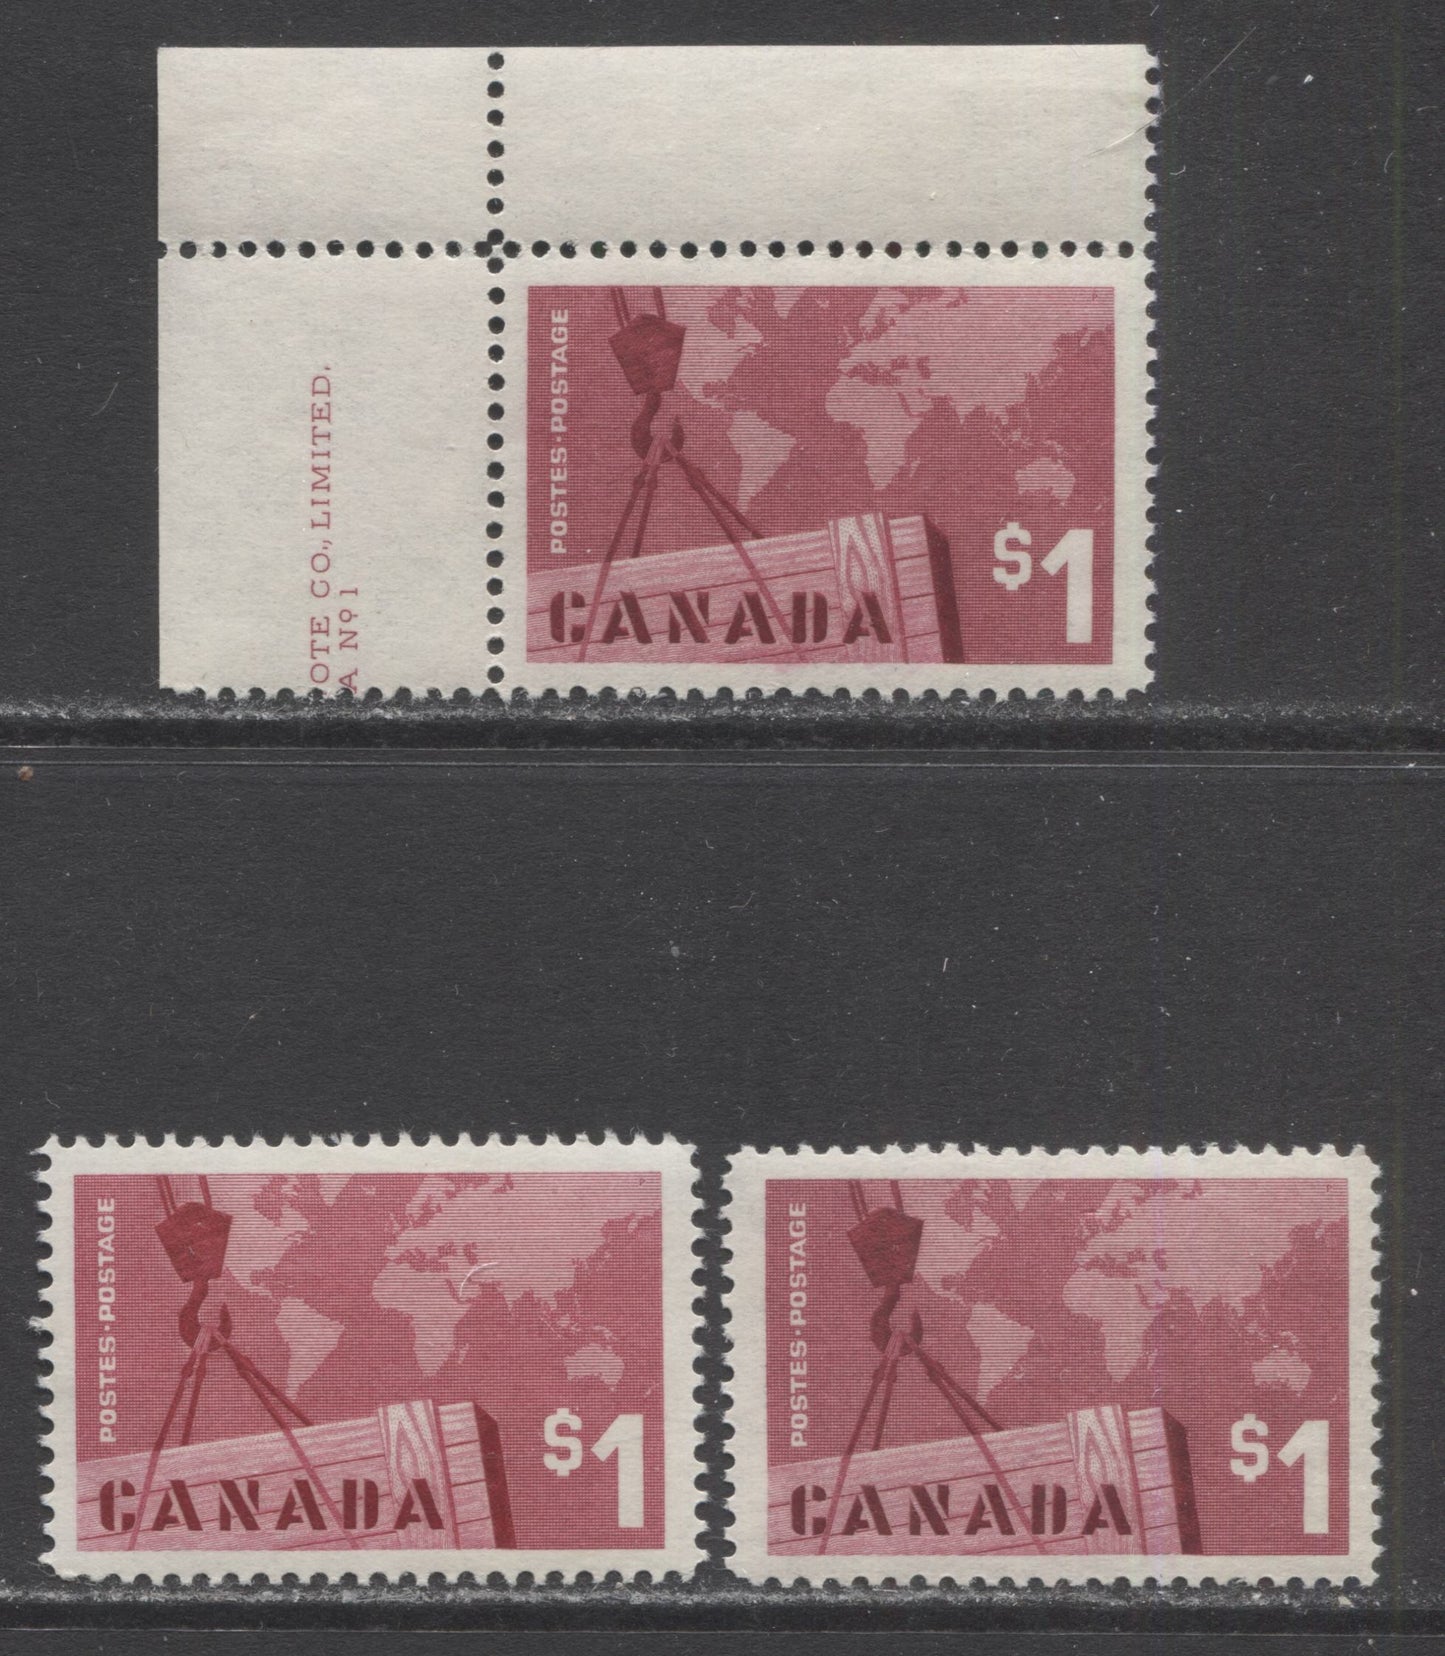 Lot 208 Canada #411 $1 Carmine Lake, Deep Carmine Lake & Carmine Rose Crane & Map, 1963 Canadian Exports Issue, 3 VFNH Singles With Different Varieties Than Lot #207